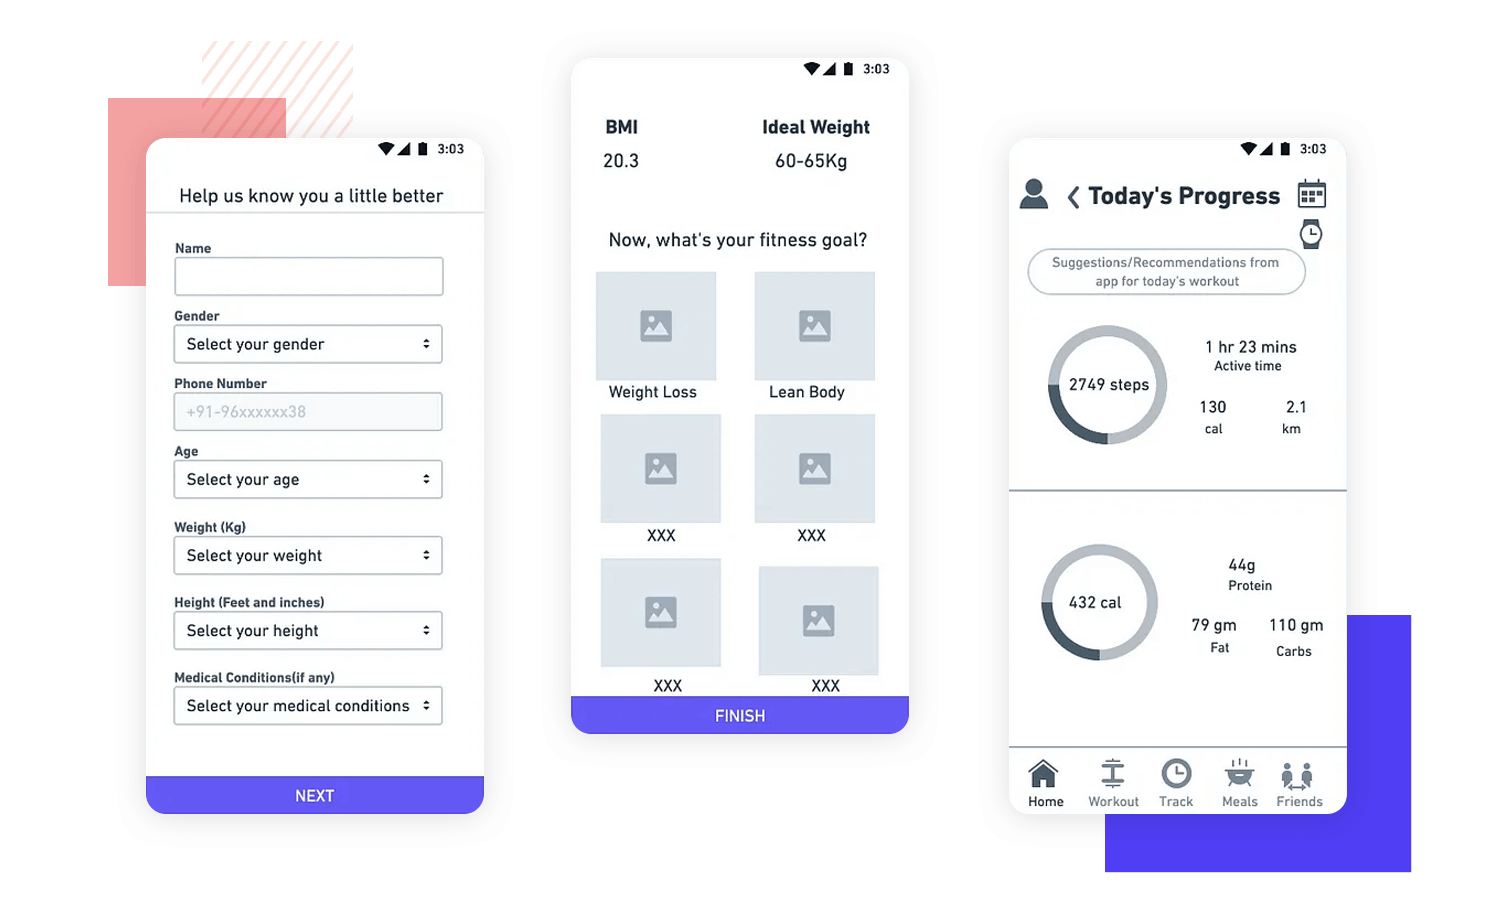 Health app wireframe showing user info input, fitness goals, and daily activity stats